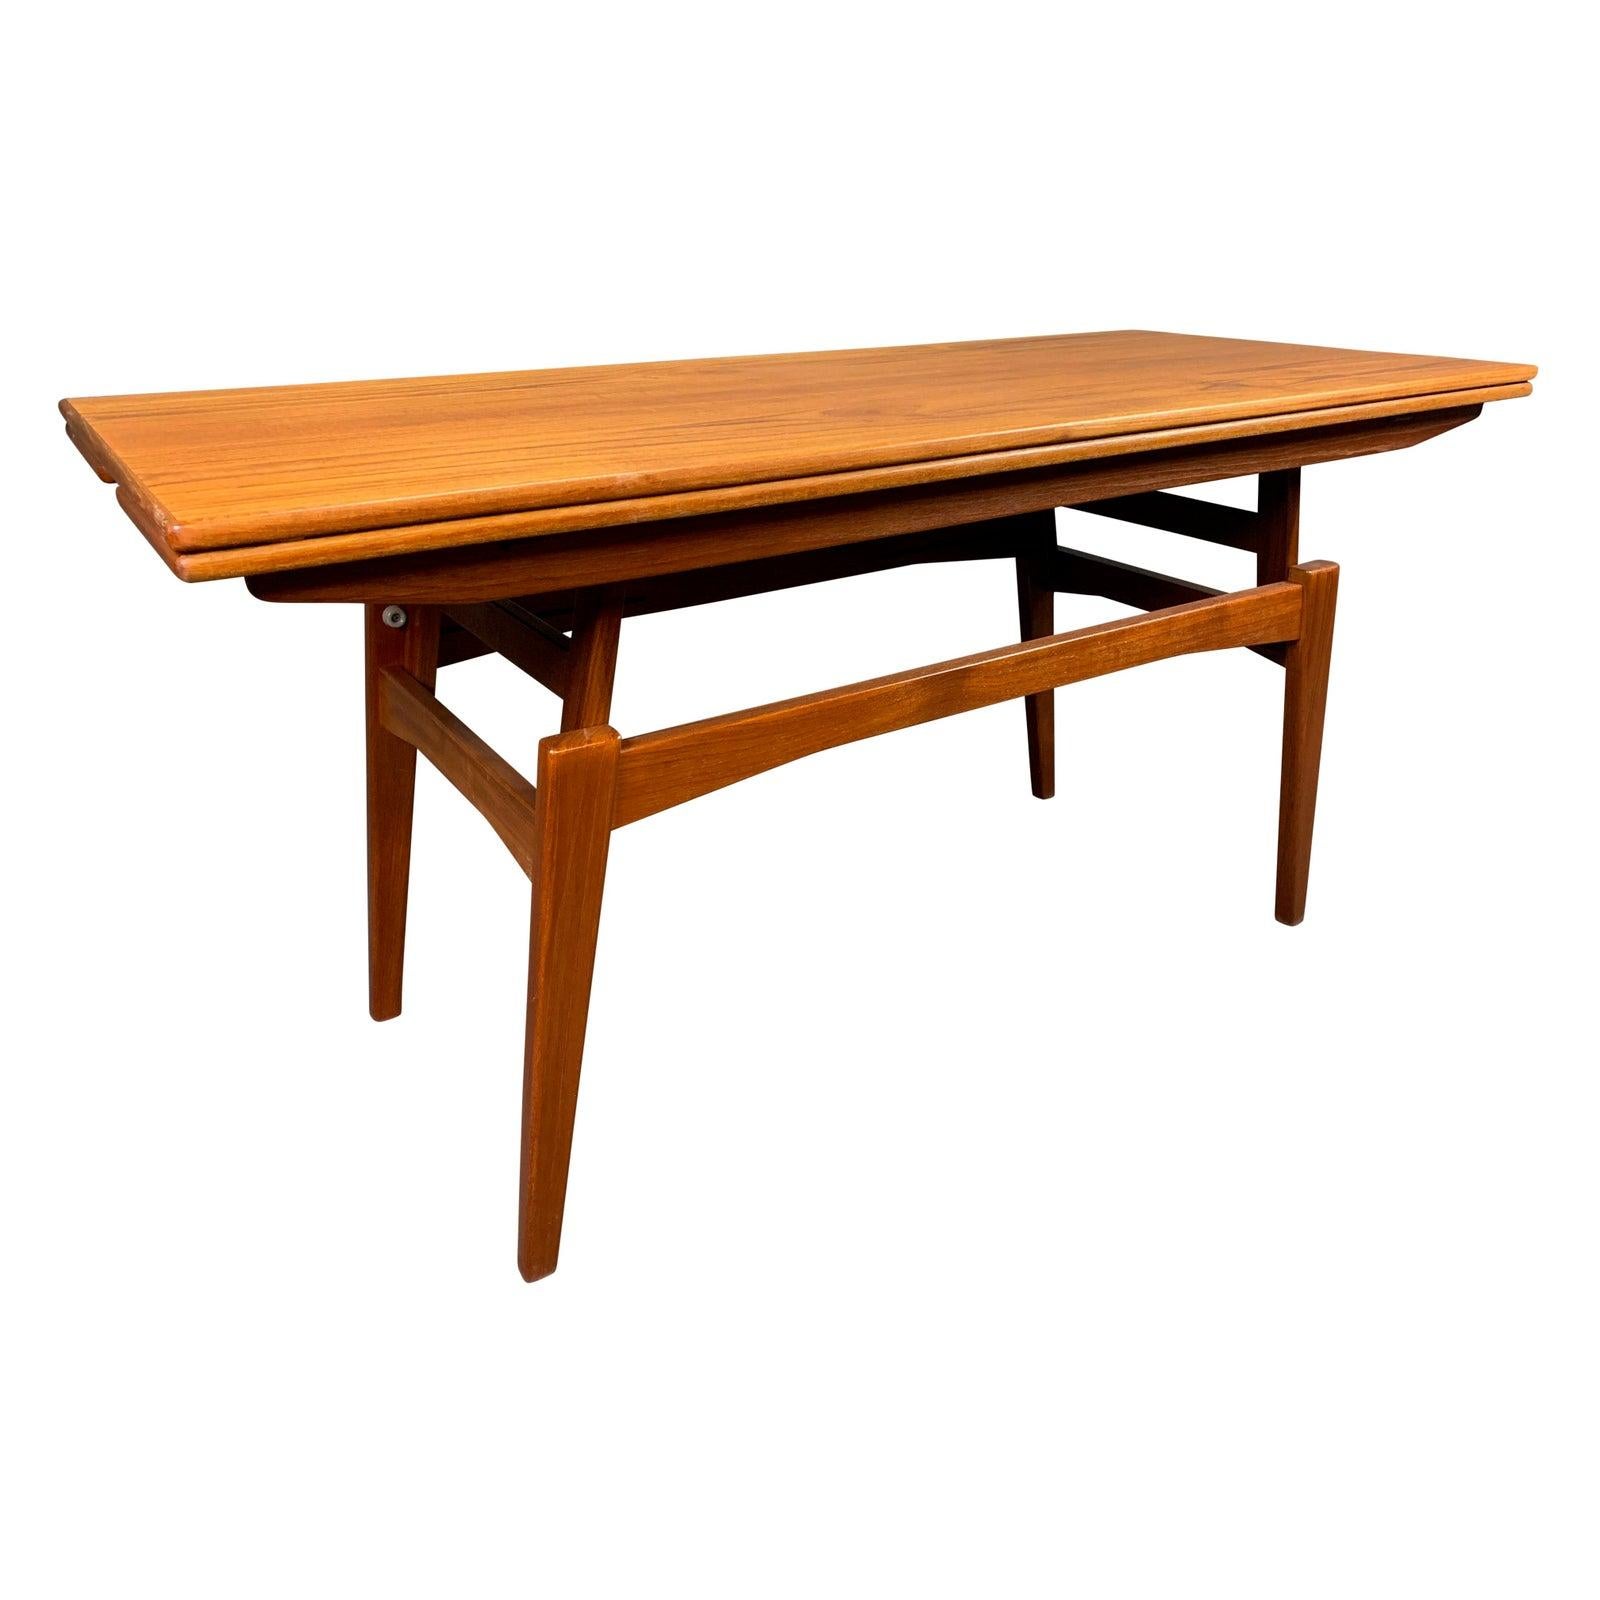 Here is very clever 1960s Scandinavian Modern elevator coffee-dining table in teak wood recently imported from Denmark to California before its restoration.
This beautiful and special table, with its vibrant wood grain, offers the option to